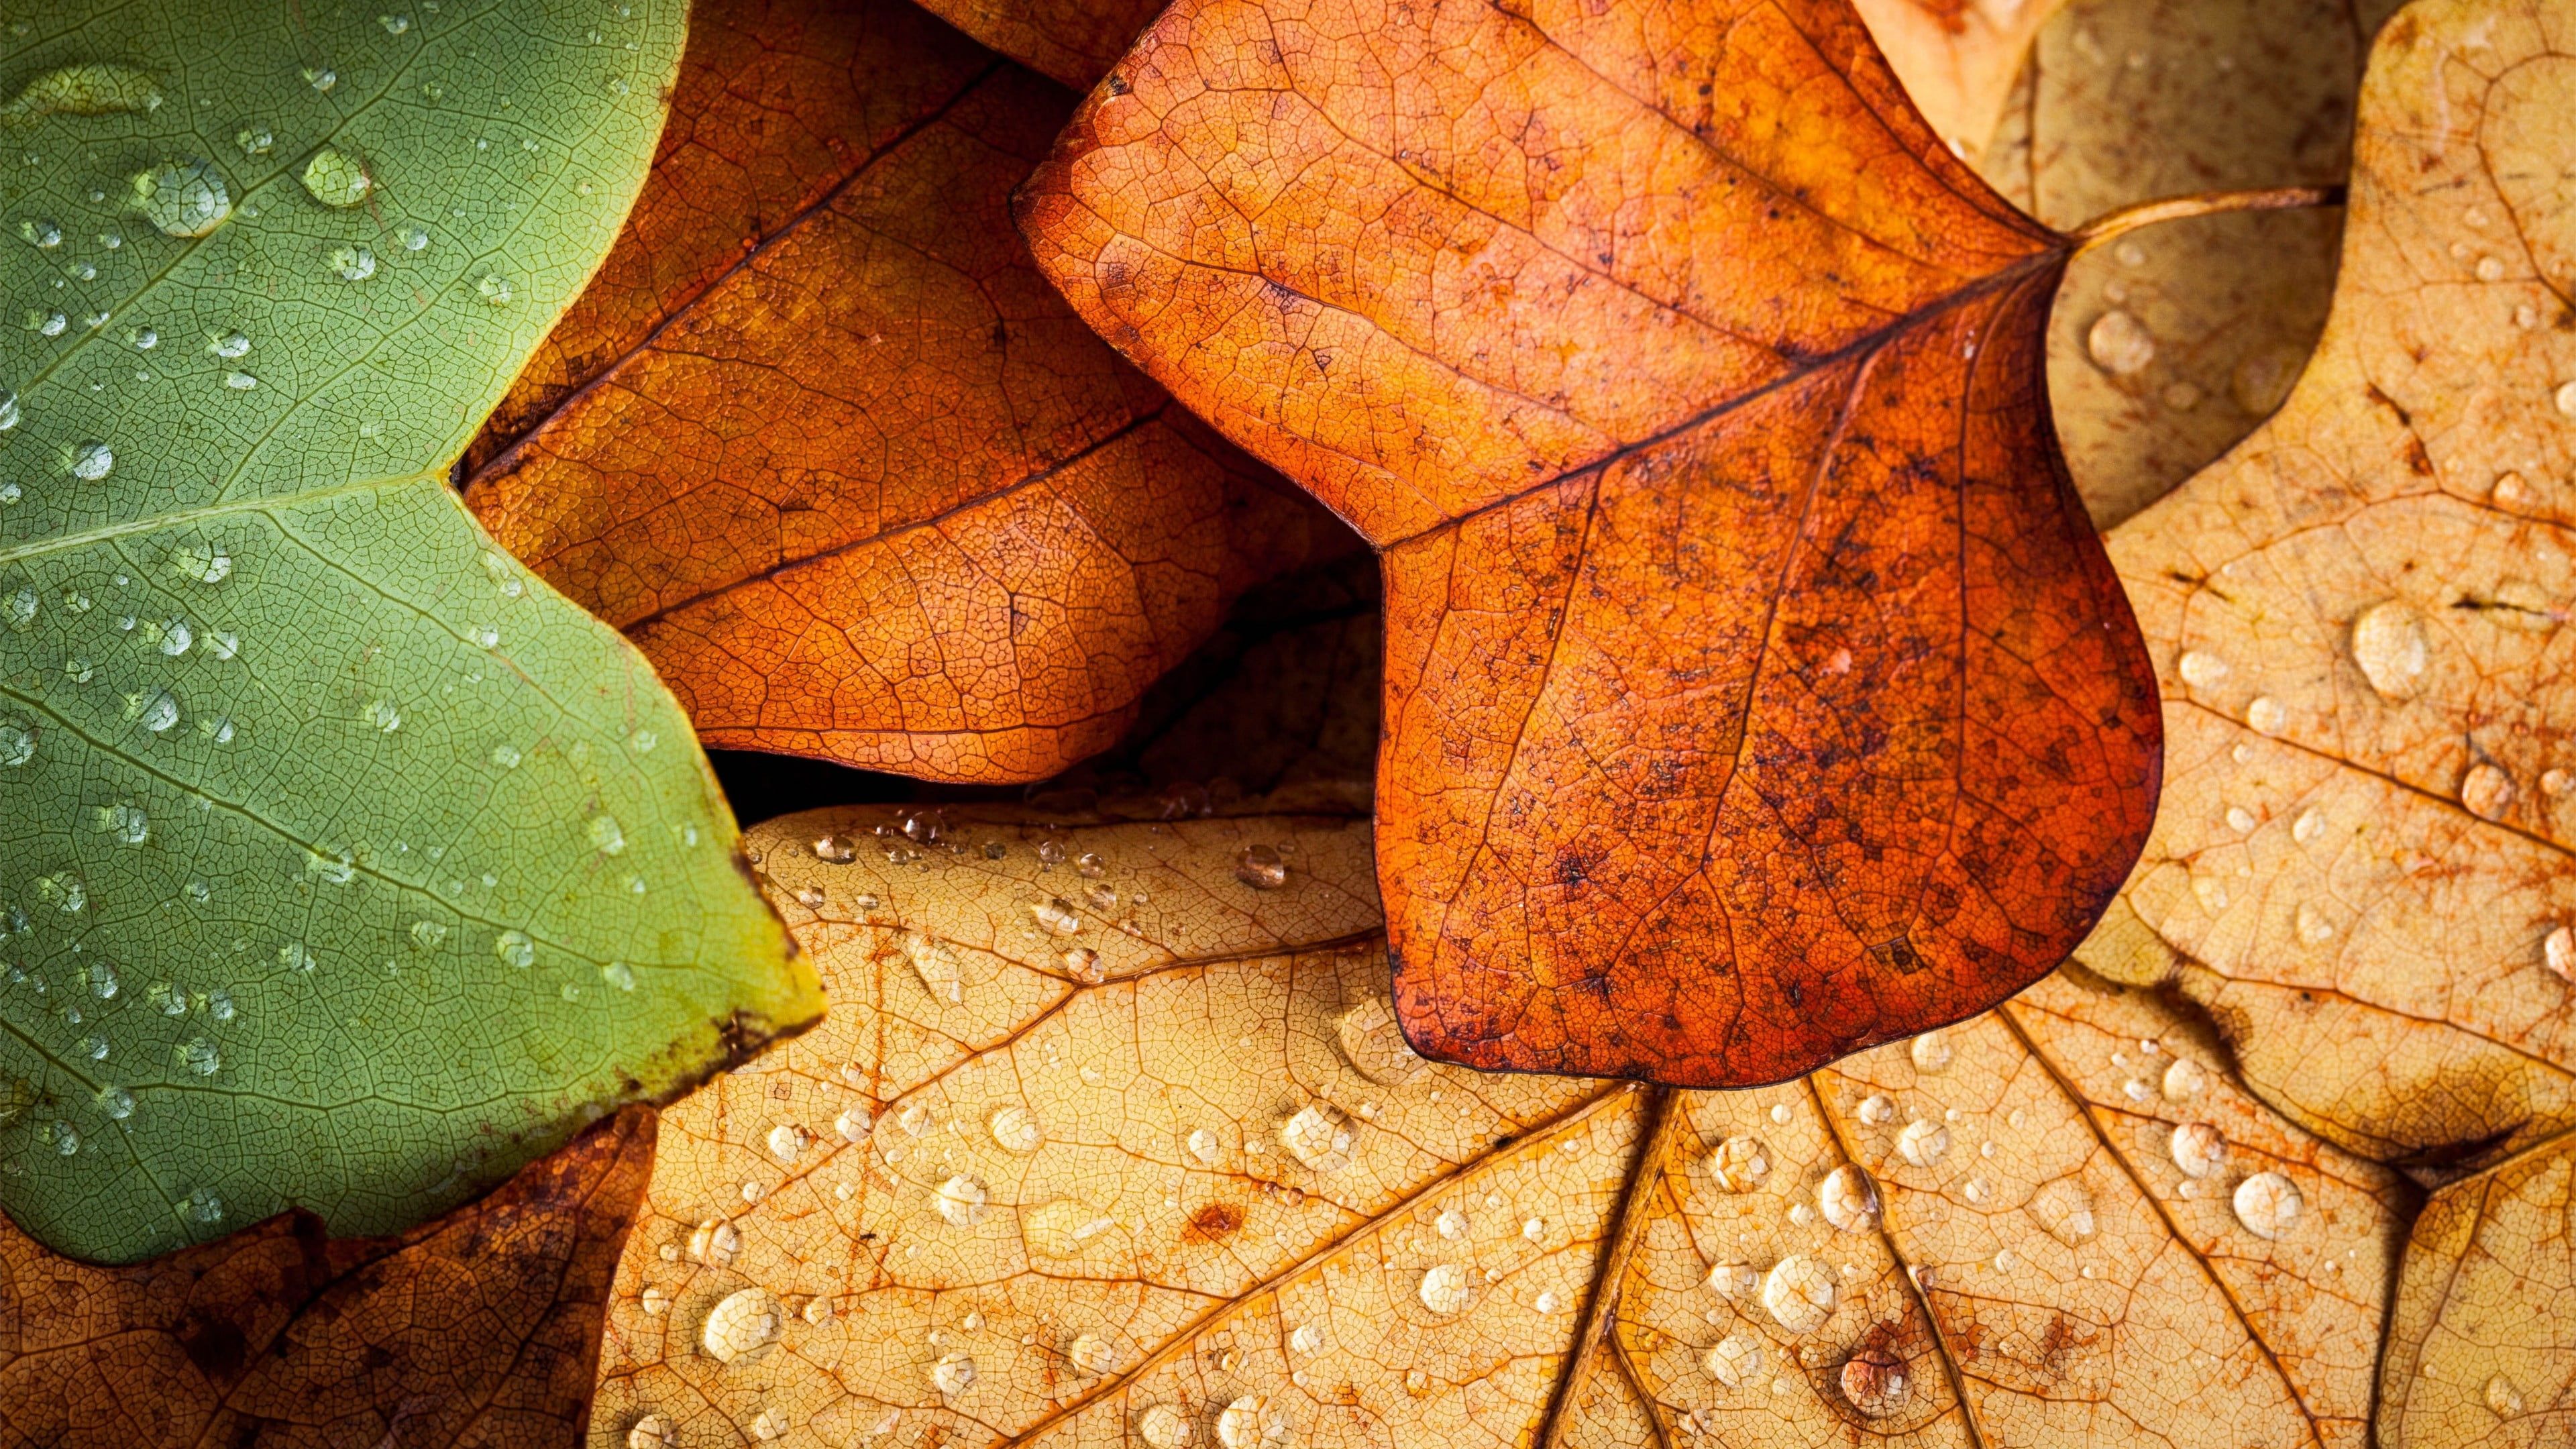 several withered leaves, green and brown leaves #nature #leaves #closeup #macro #fall water drops #wet K. Autumn leaves wallpaper, Wallpaper, Planets wallpaper